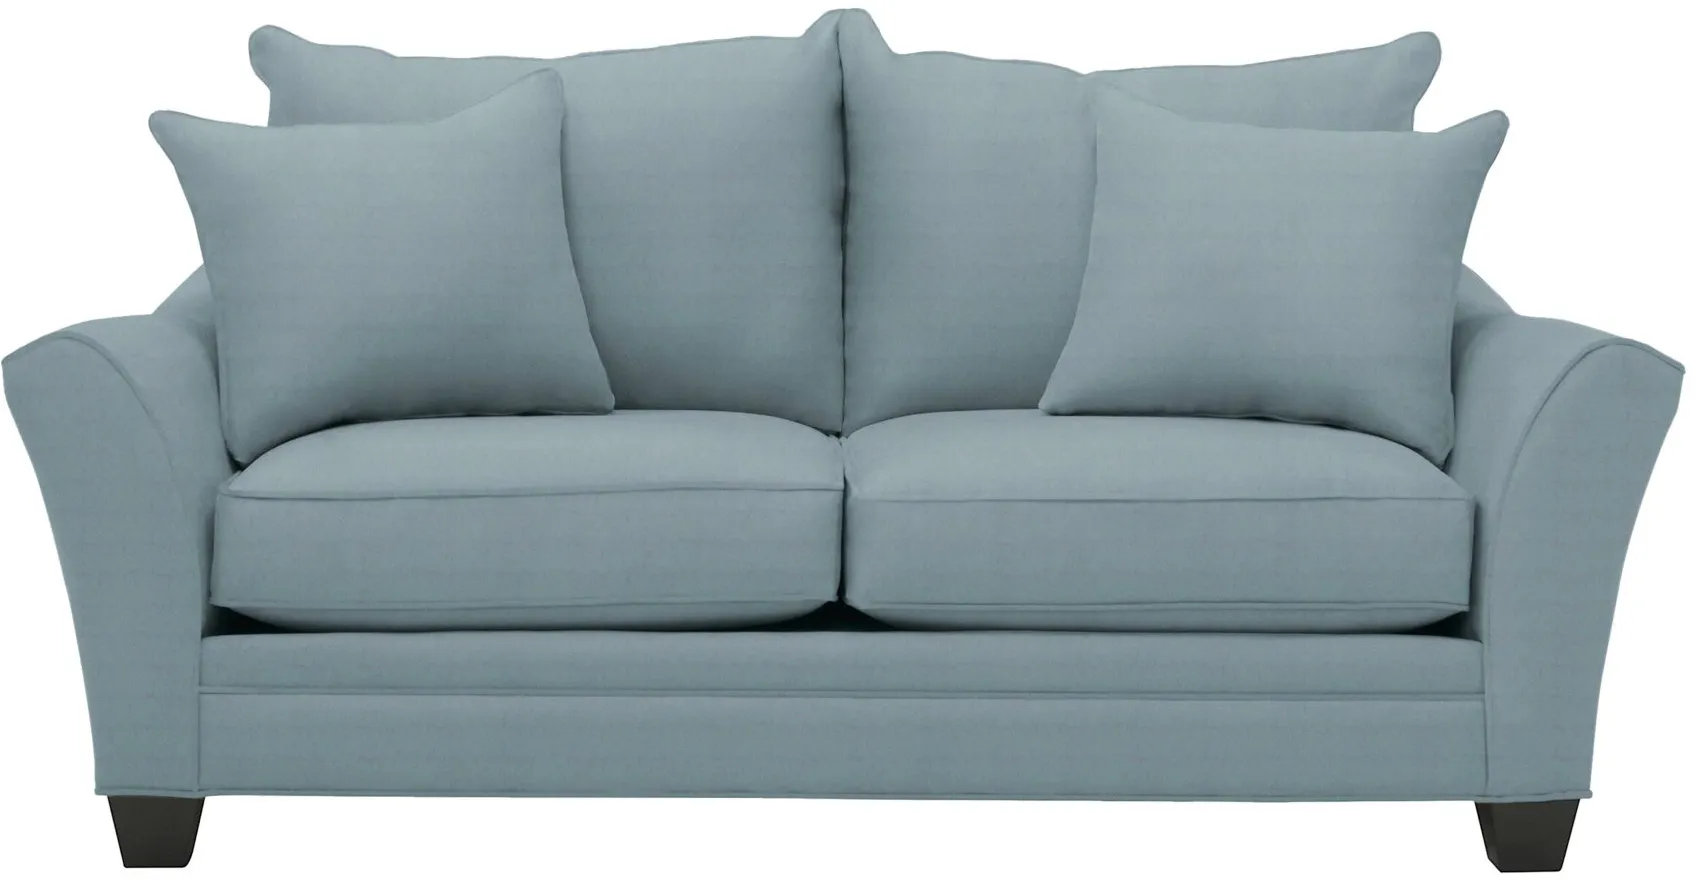 Briarwood Apartment Sleeper Sofa in Suede So Soft Hydra by H.M. Richards